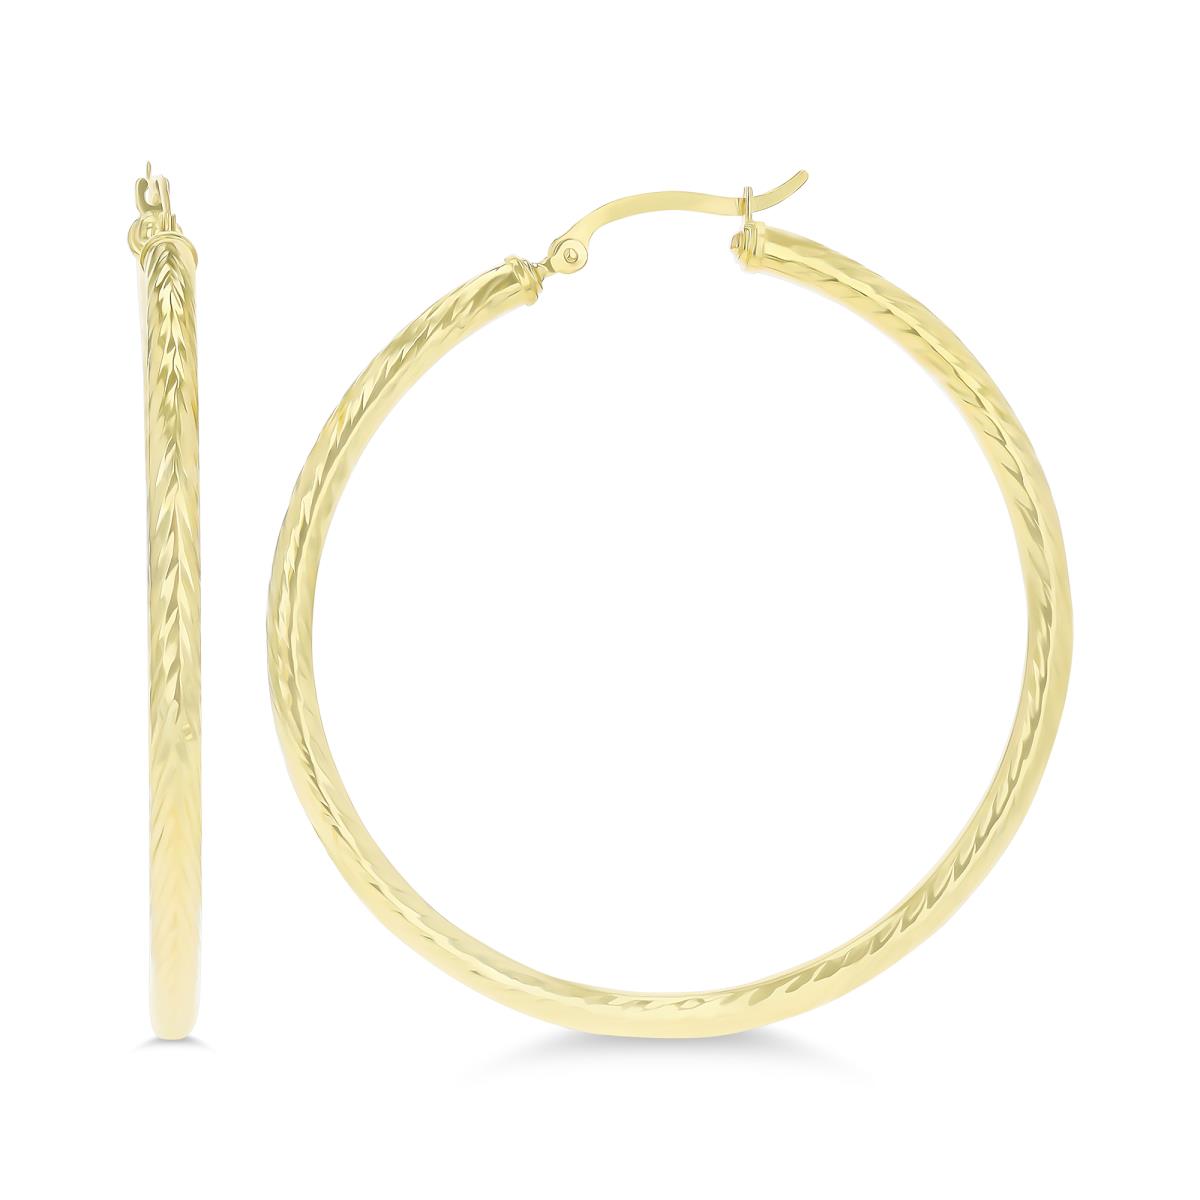 14K Yellow Gold 50x3mm (2.00") Twisted DC Hoop Earring